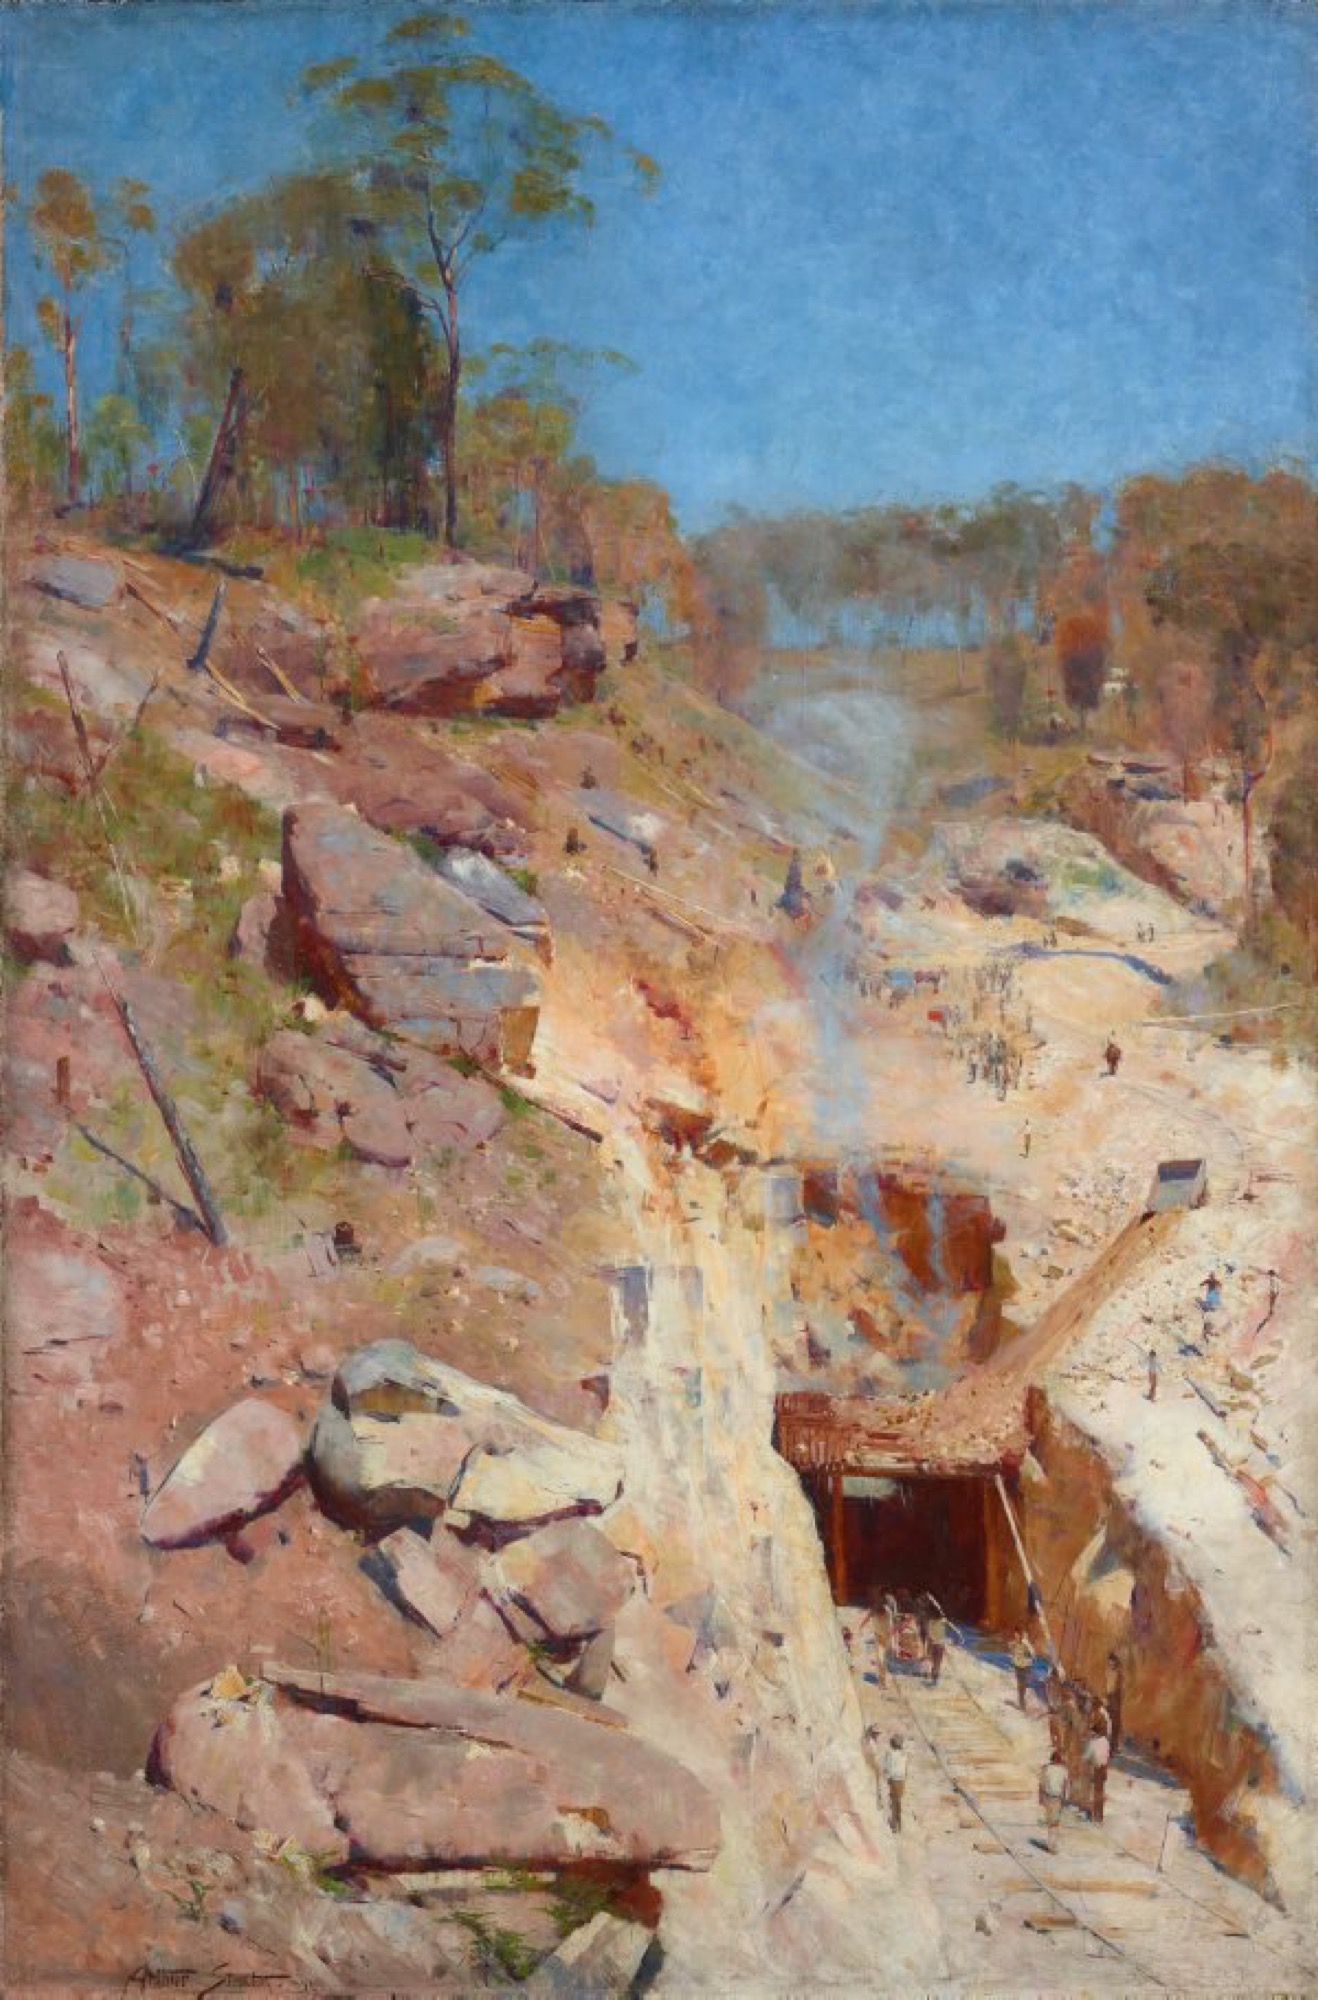 Arthur Streeton, <em>Fire’s on</em>, 1891. Oil on canvas. Art Gallery of New South Wales, Sydney. Purchased 1893.